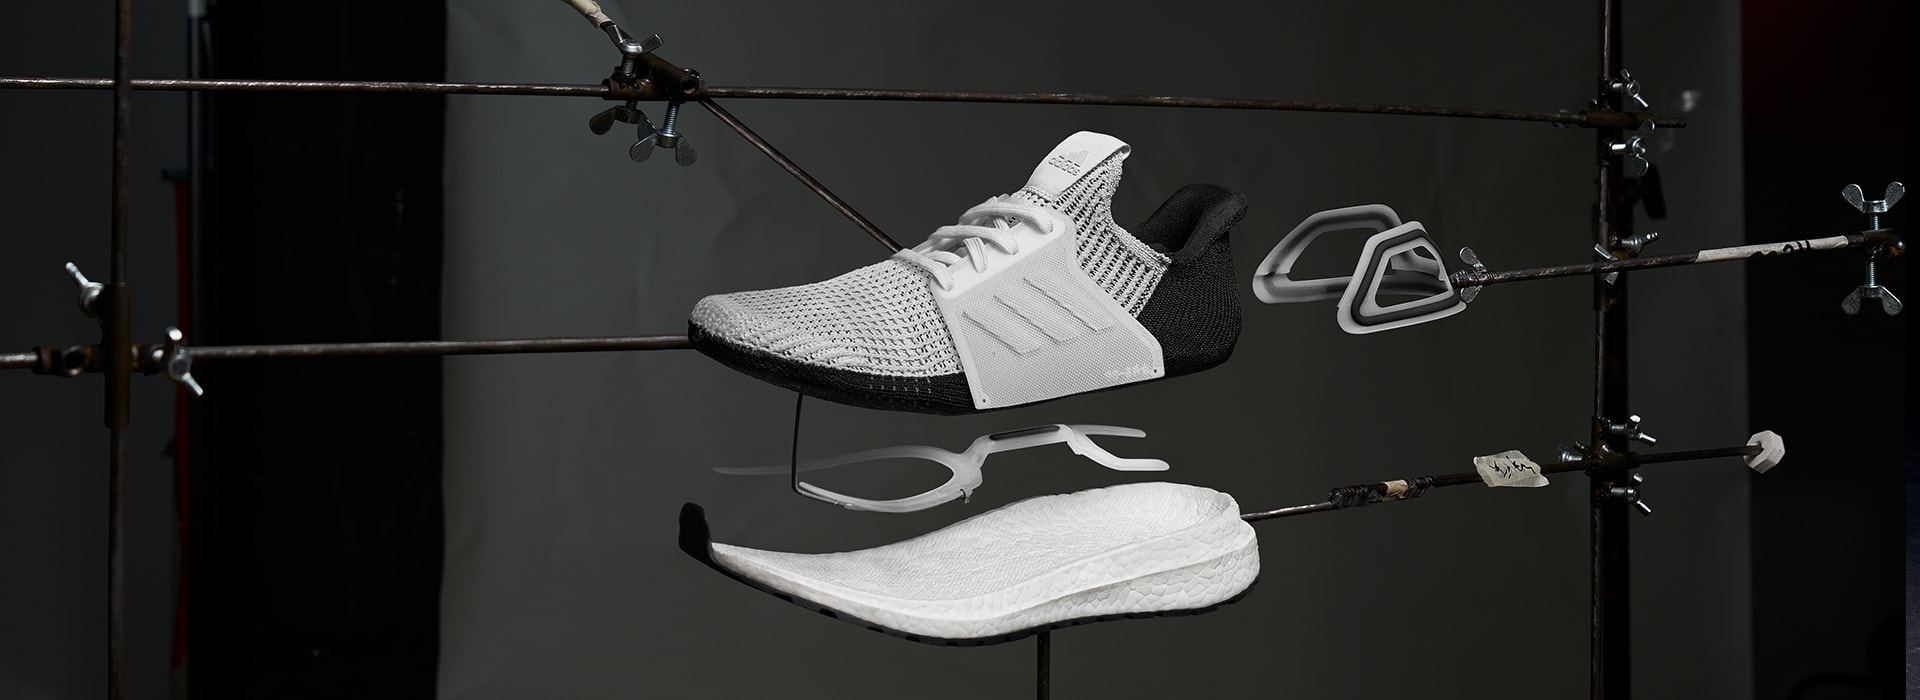 boost sizing